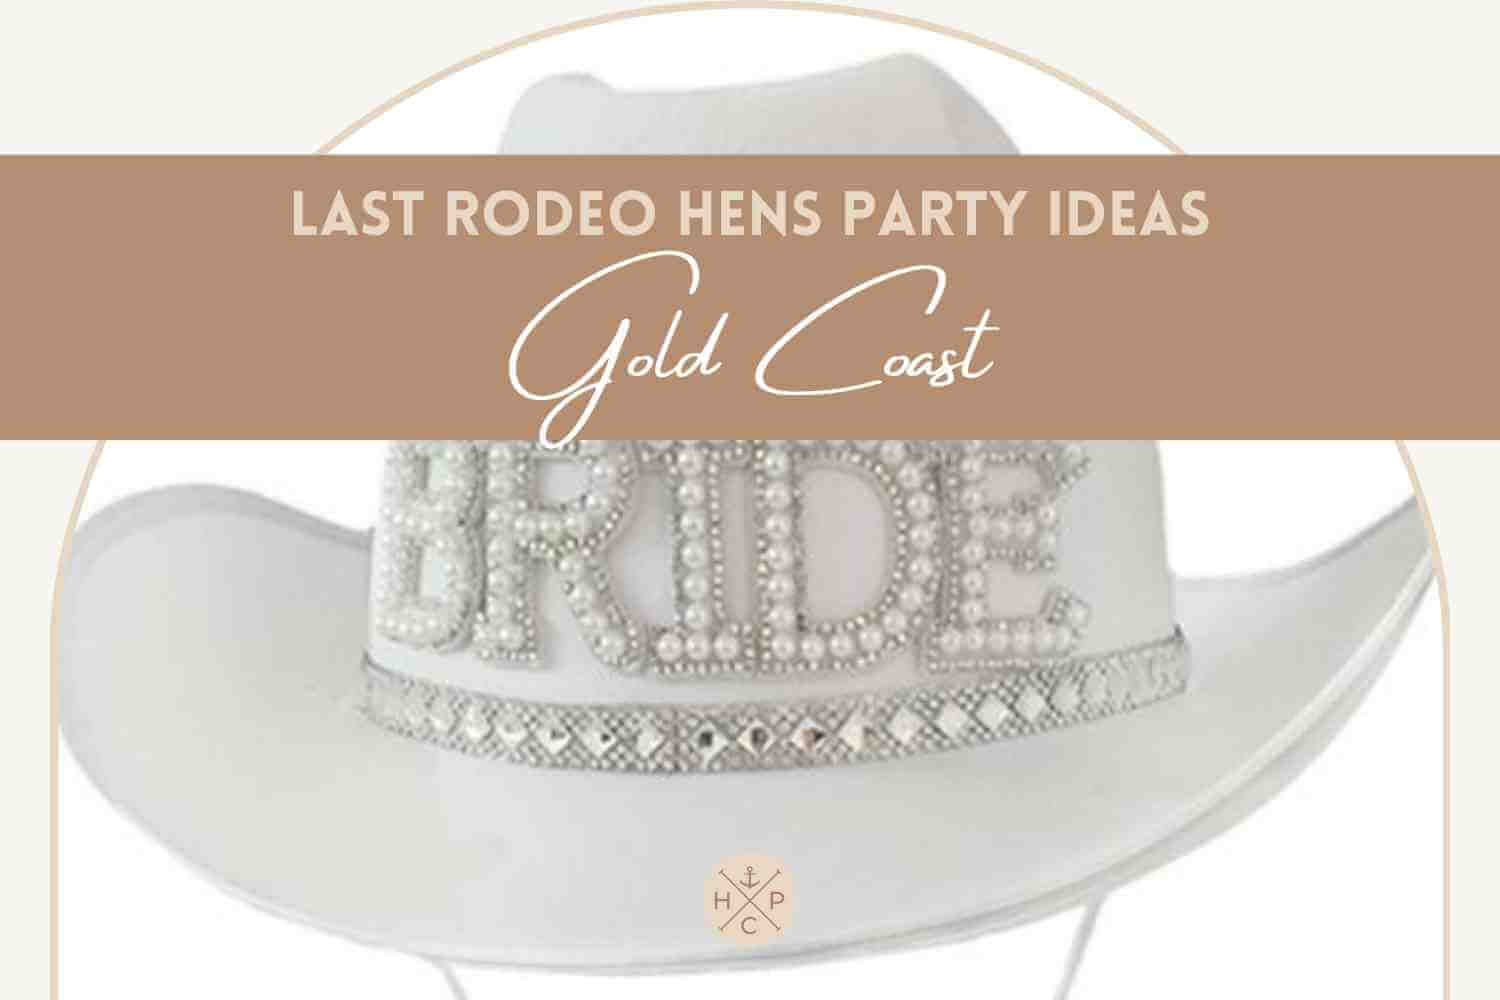 Last Rodeo hens party ideas